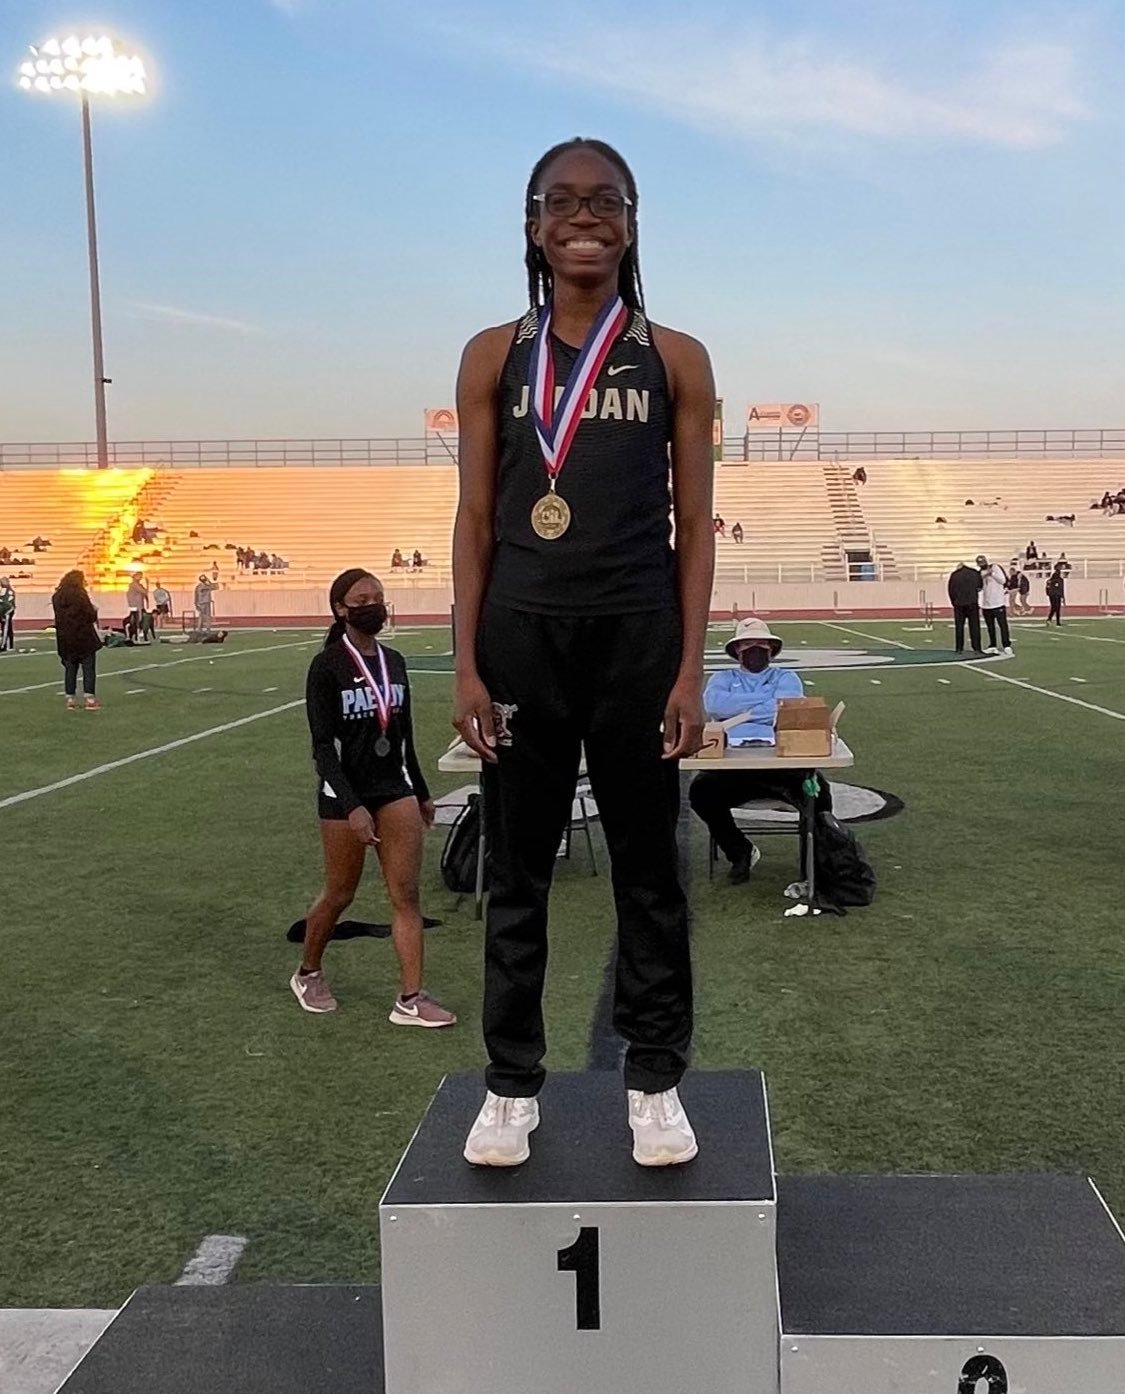 Jordan freshman Tiyan Ogbeide won the 400-meter dash and 800-meter dash at the District 19-5A track and field meet to become the Warriors’ first district champion in track and field.